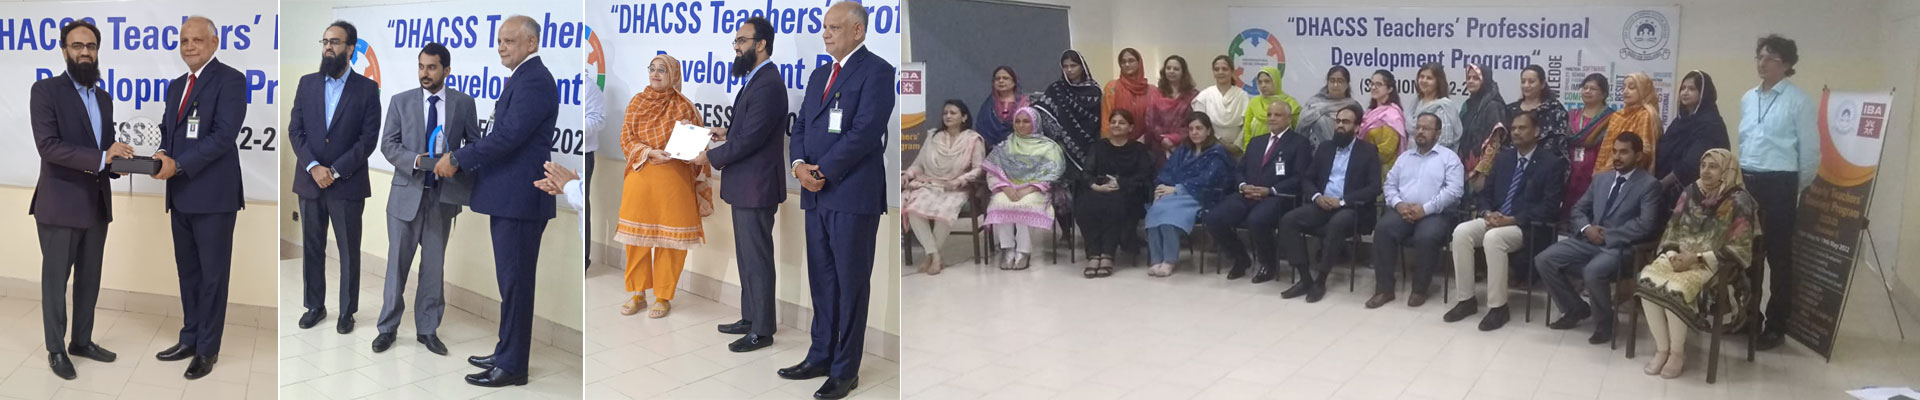 SDP at IBA Conducts Professional Development Program for DHACSS